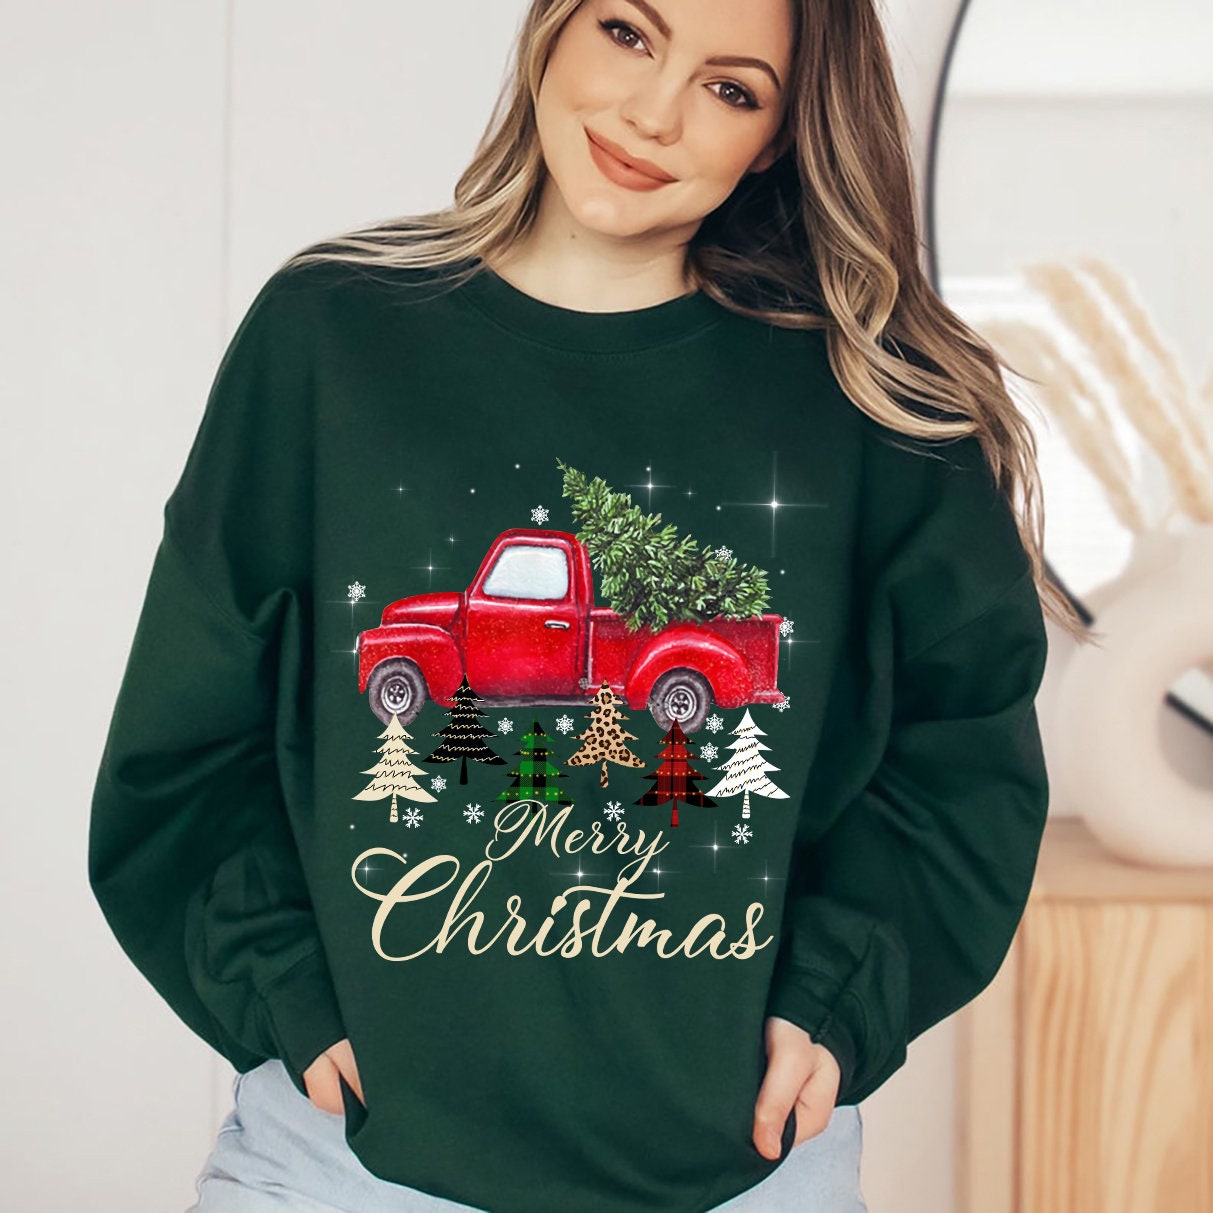 Discover Merry Christmas Red Truck Sweater, Old Red Truck Sweatshirt